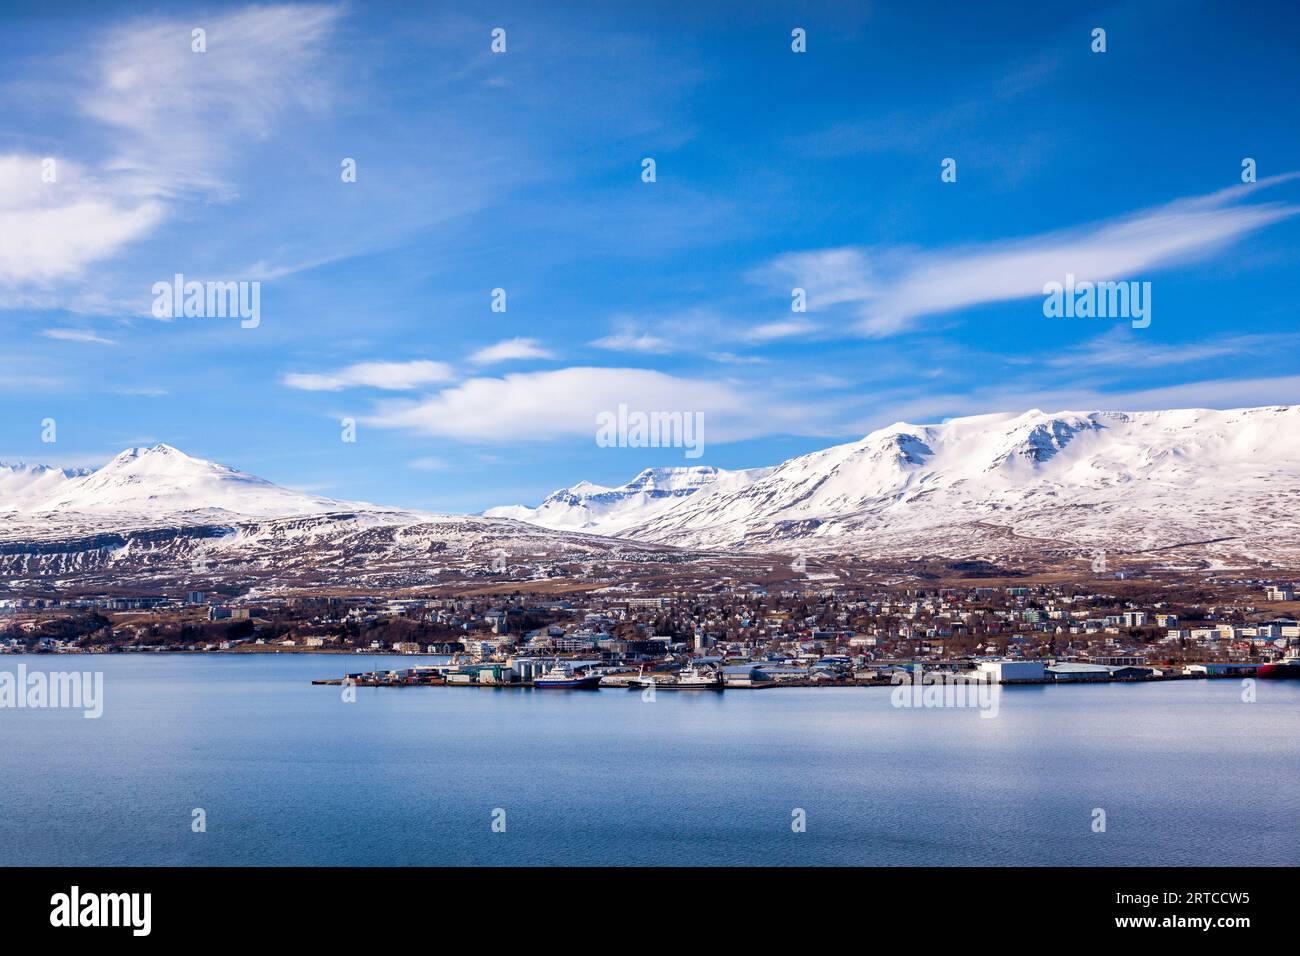 The town of Akureyri, on the banks of the fiord Eyjafjordur, in North Iceland, in spring. Stock Photo